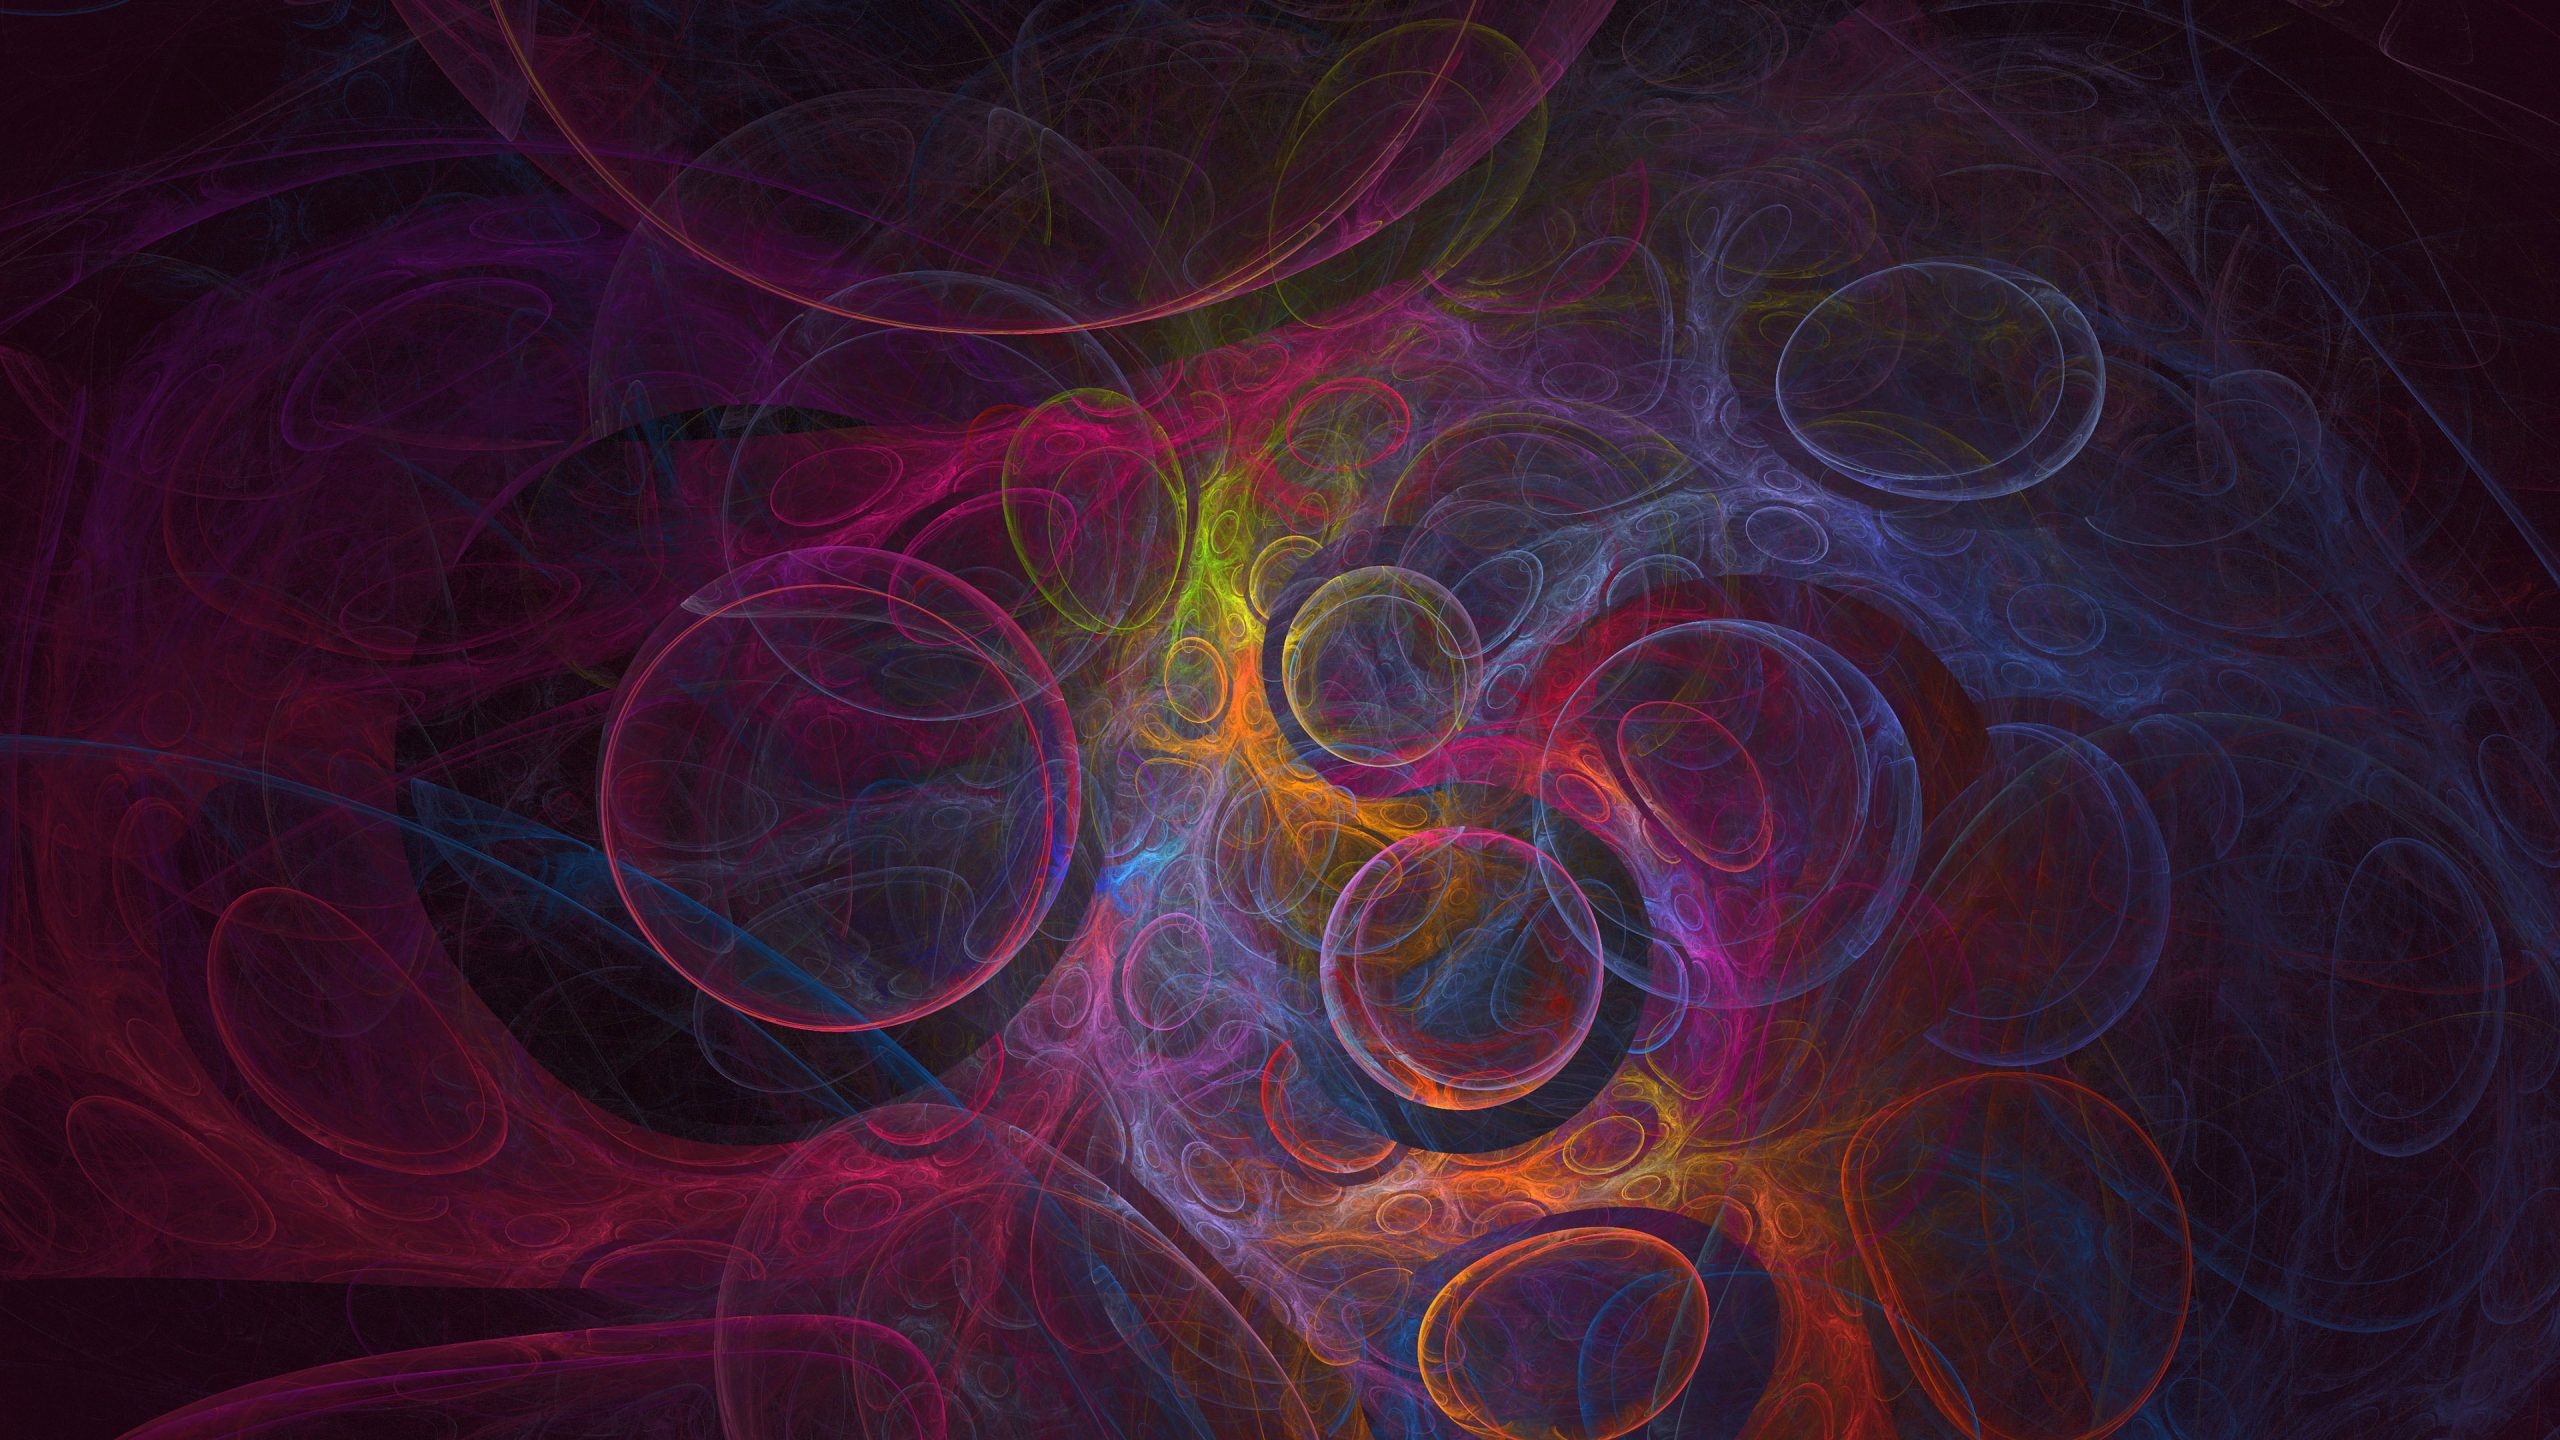 Fractal wallpaper, abstract, psychedelic, digital art, colorful